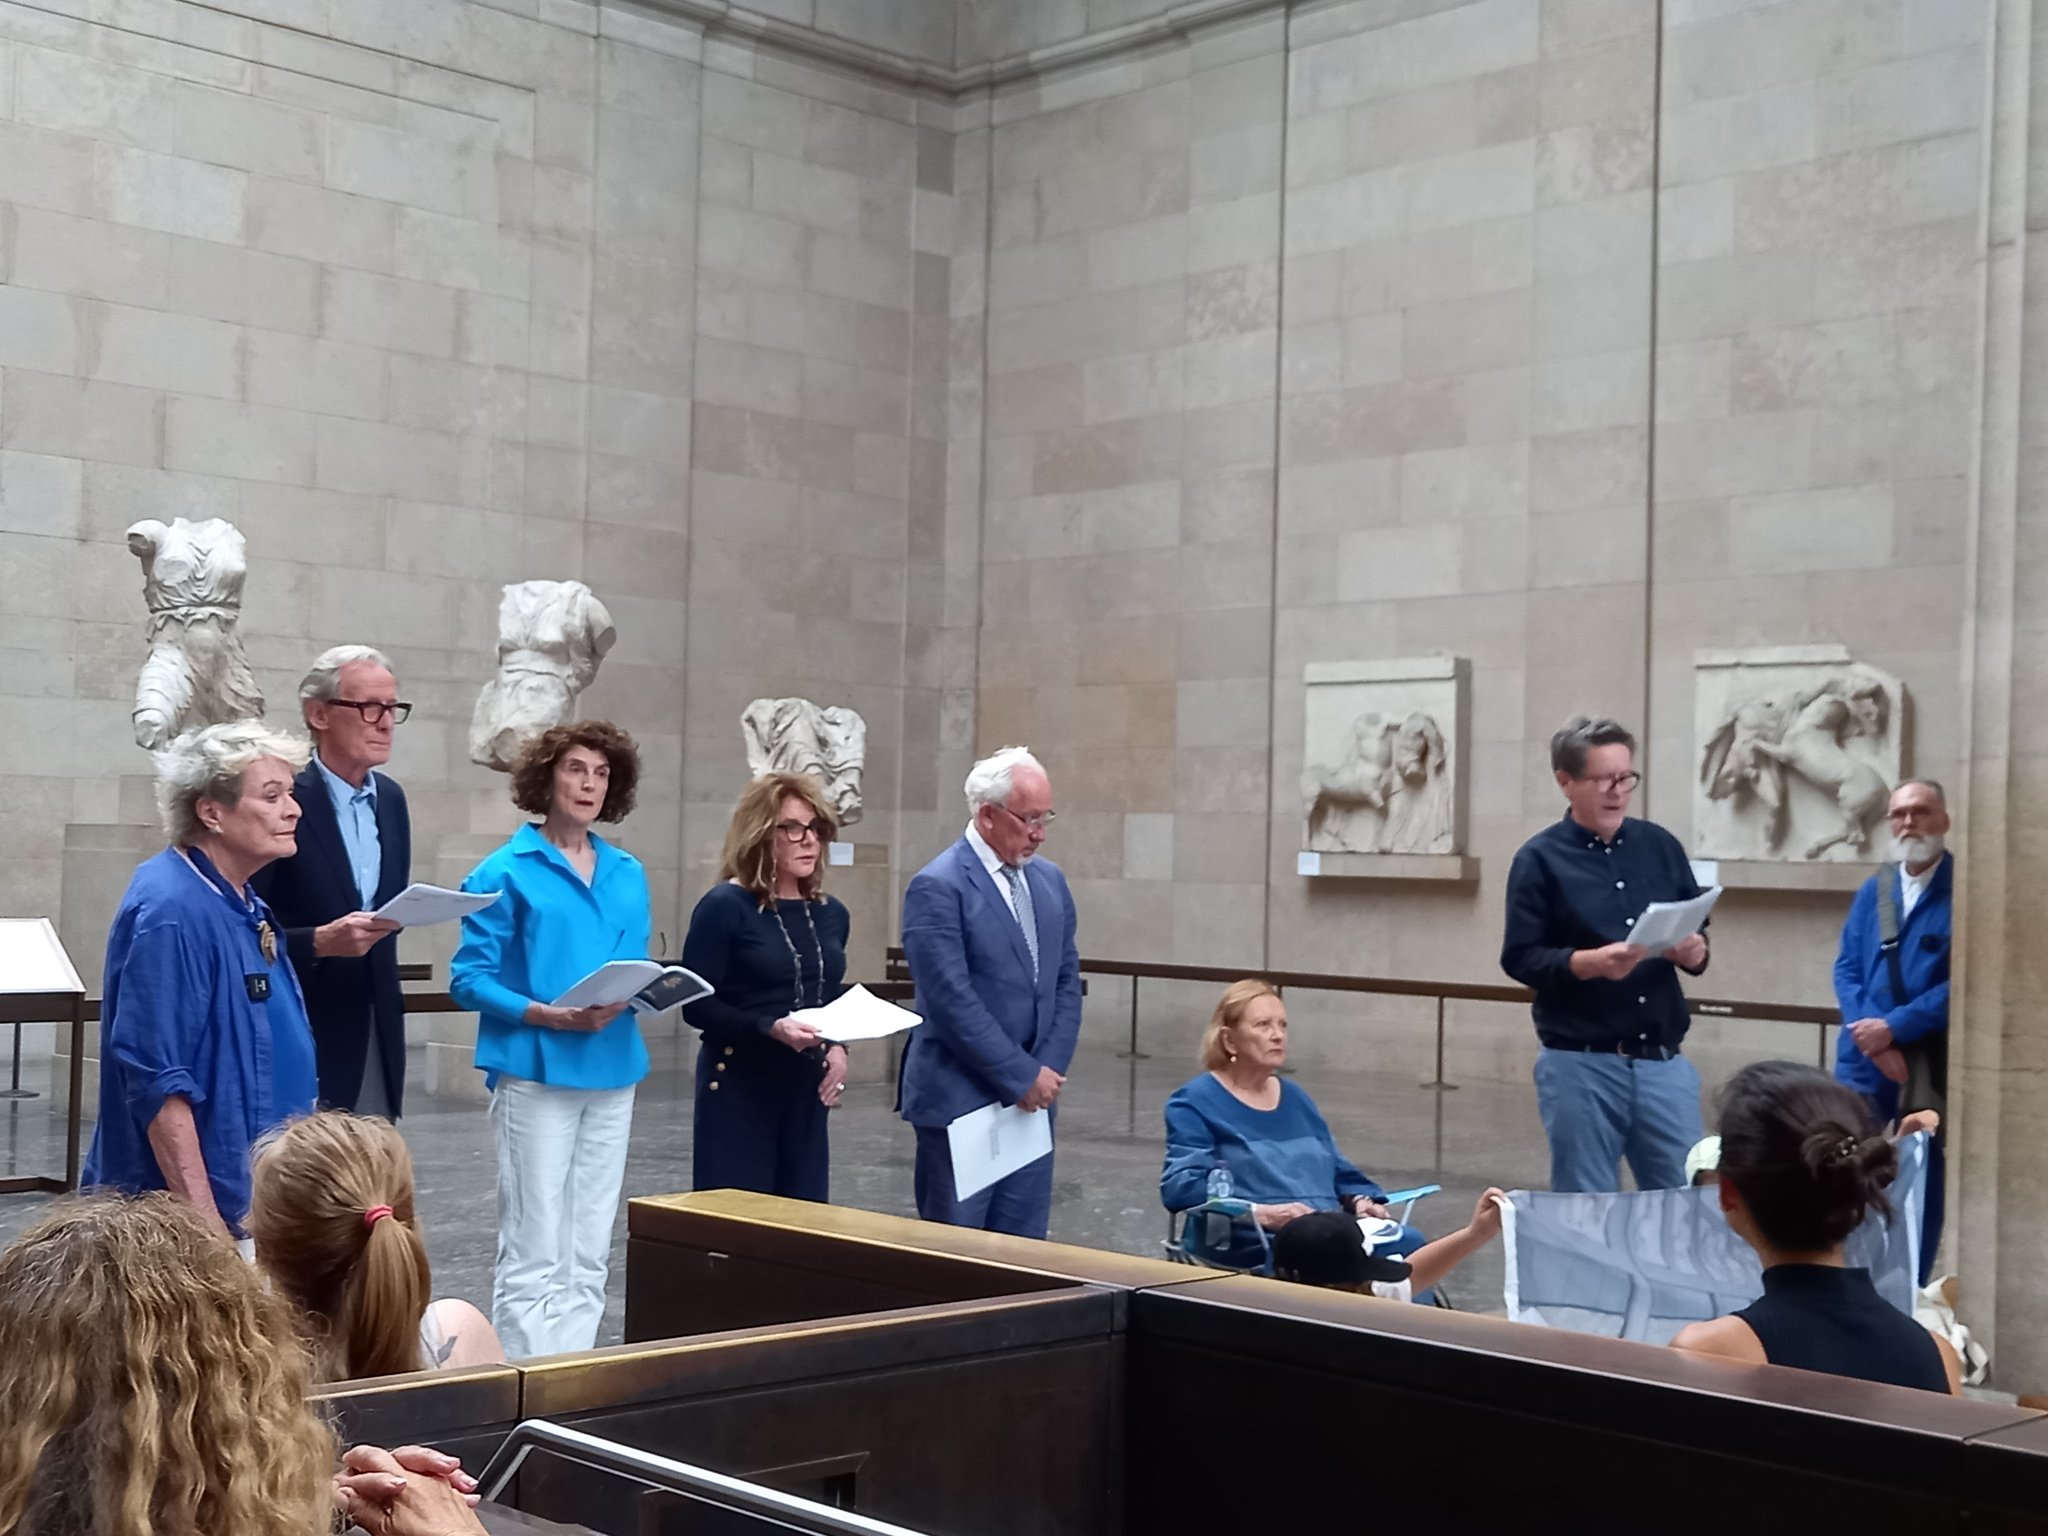 Sunday 18 June in the Parthenon Galleries, Room 18 at the British Museum with acclaimed actors